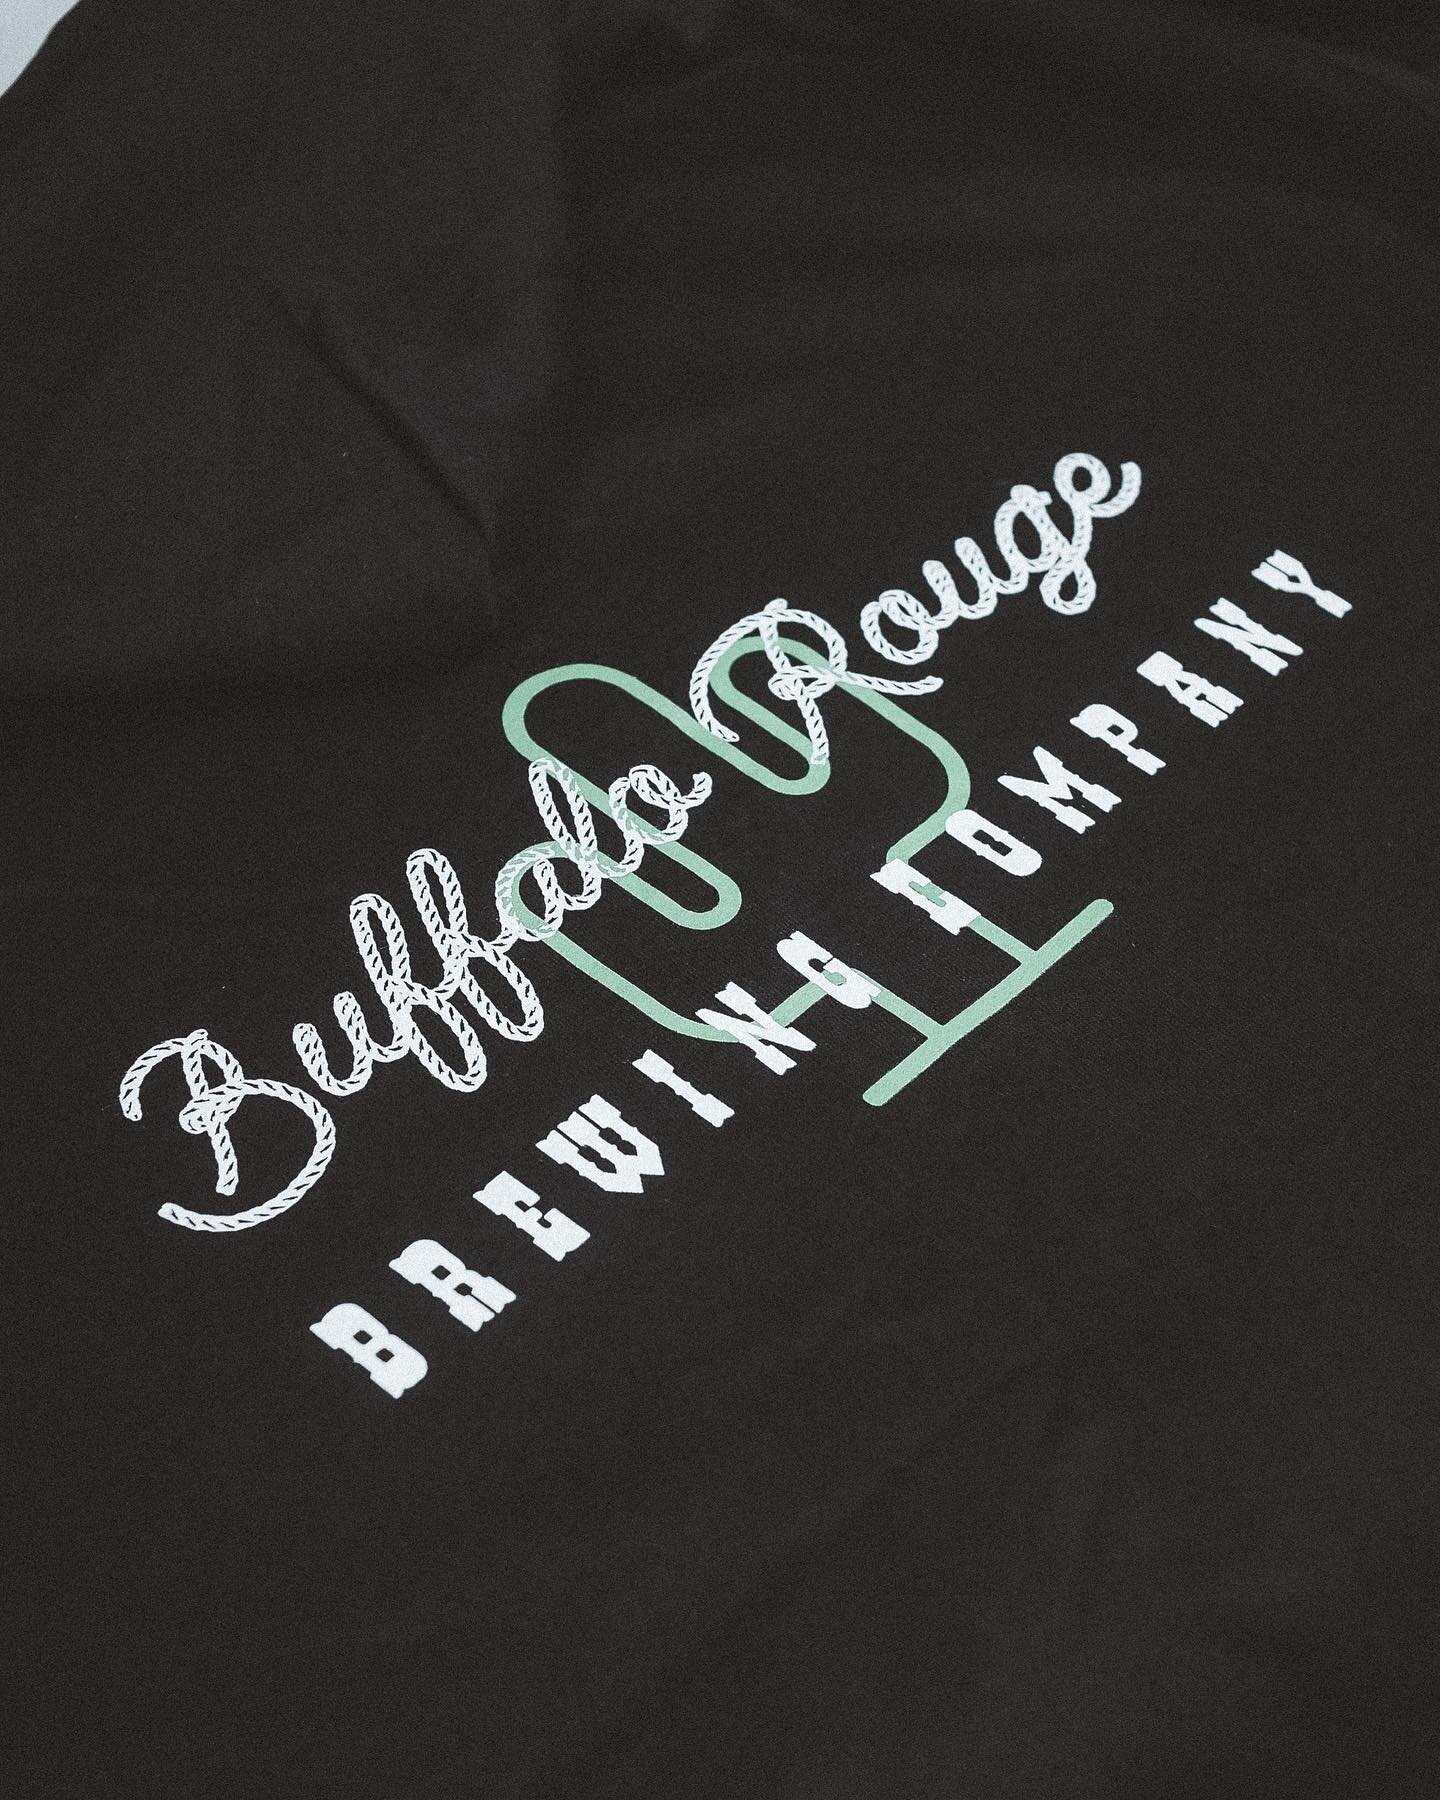 Hello friends!

We&rsquo;re so honoured to have printed a run for Kelowna&rsquo;s newest brewery @buffalo.rouge.brewing !

The grand opening is this Saturday, October 28th from 11 am - 11 pm!

It&rsquo;ll be a family event with live music, food, acti